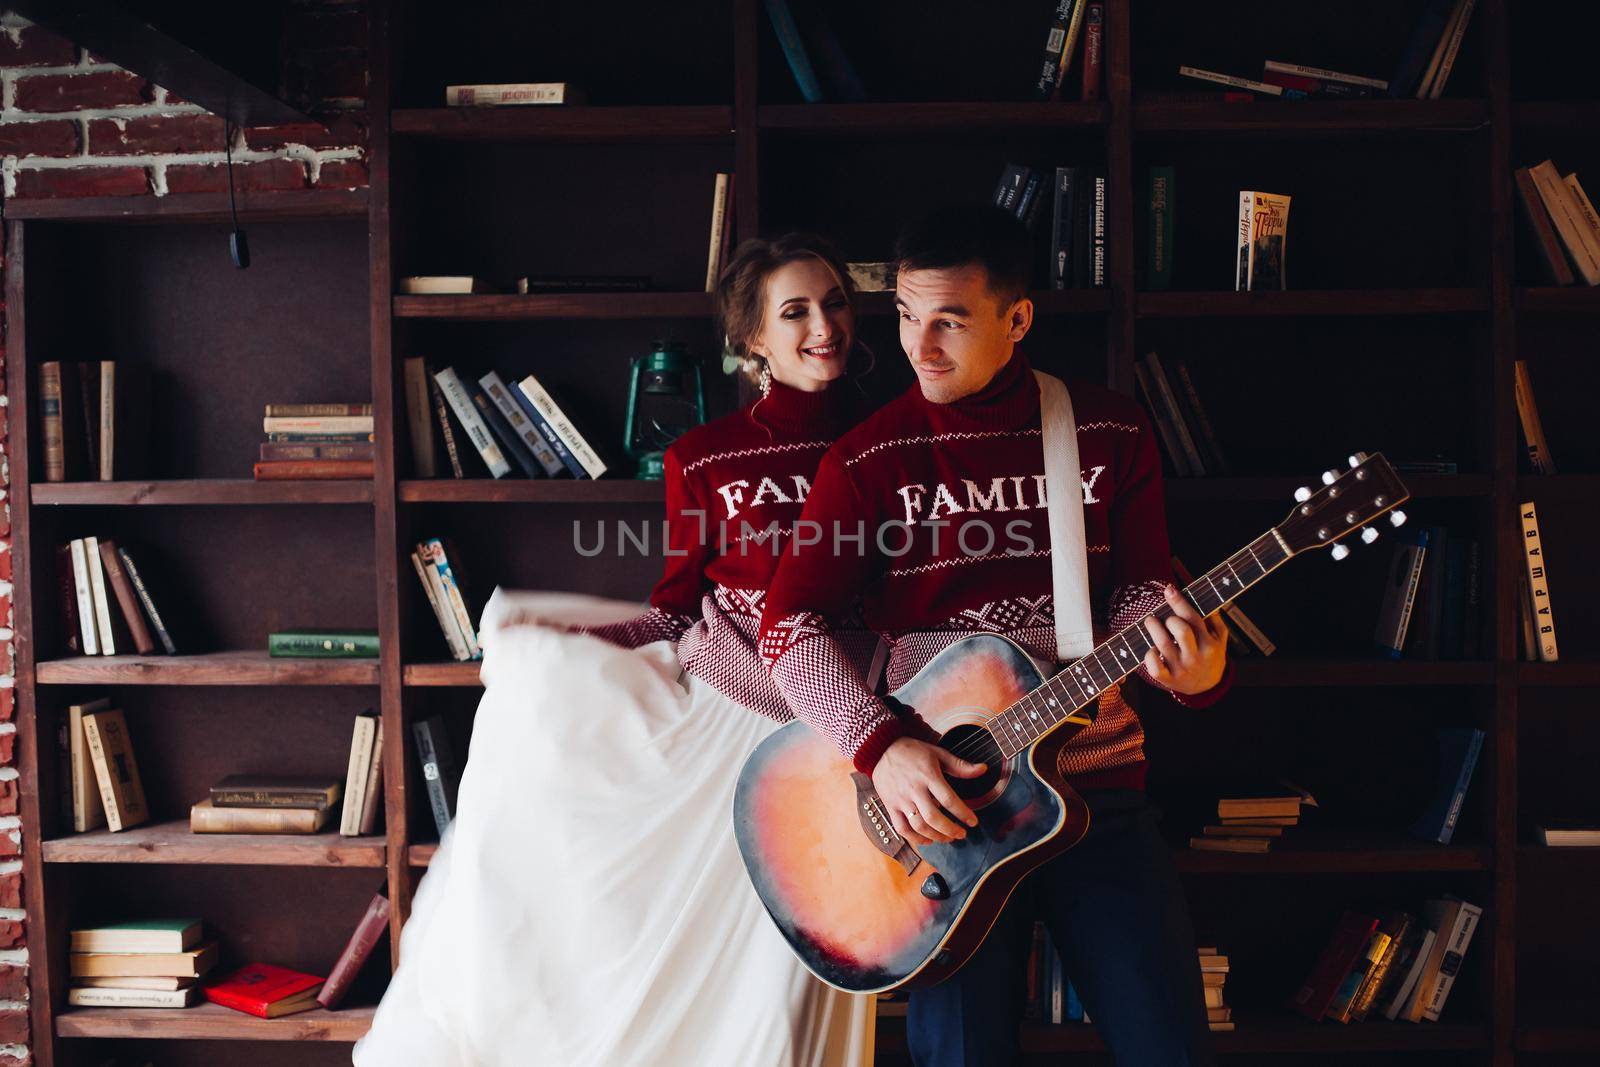 Portrait of husband and wife posing happily in red sweater with family word. Man holding guitar and woman flattering her wedding dress skirt.